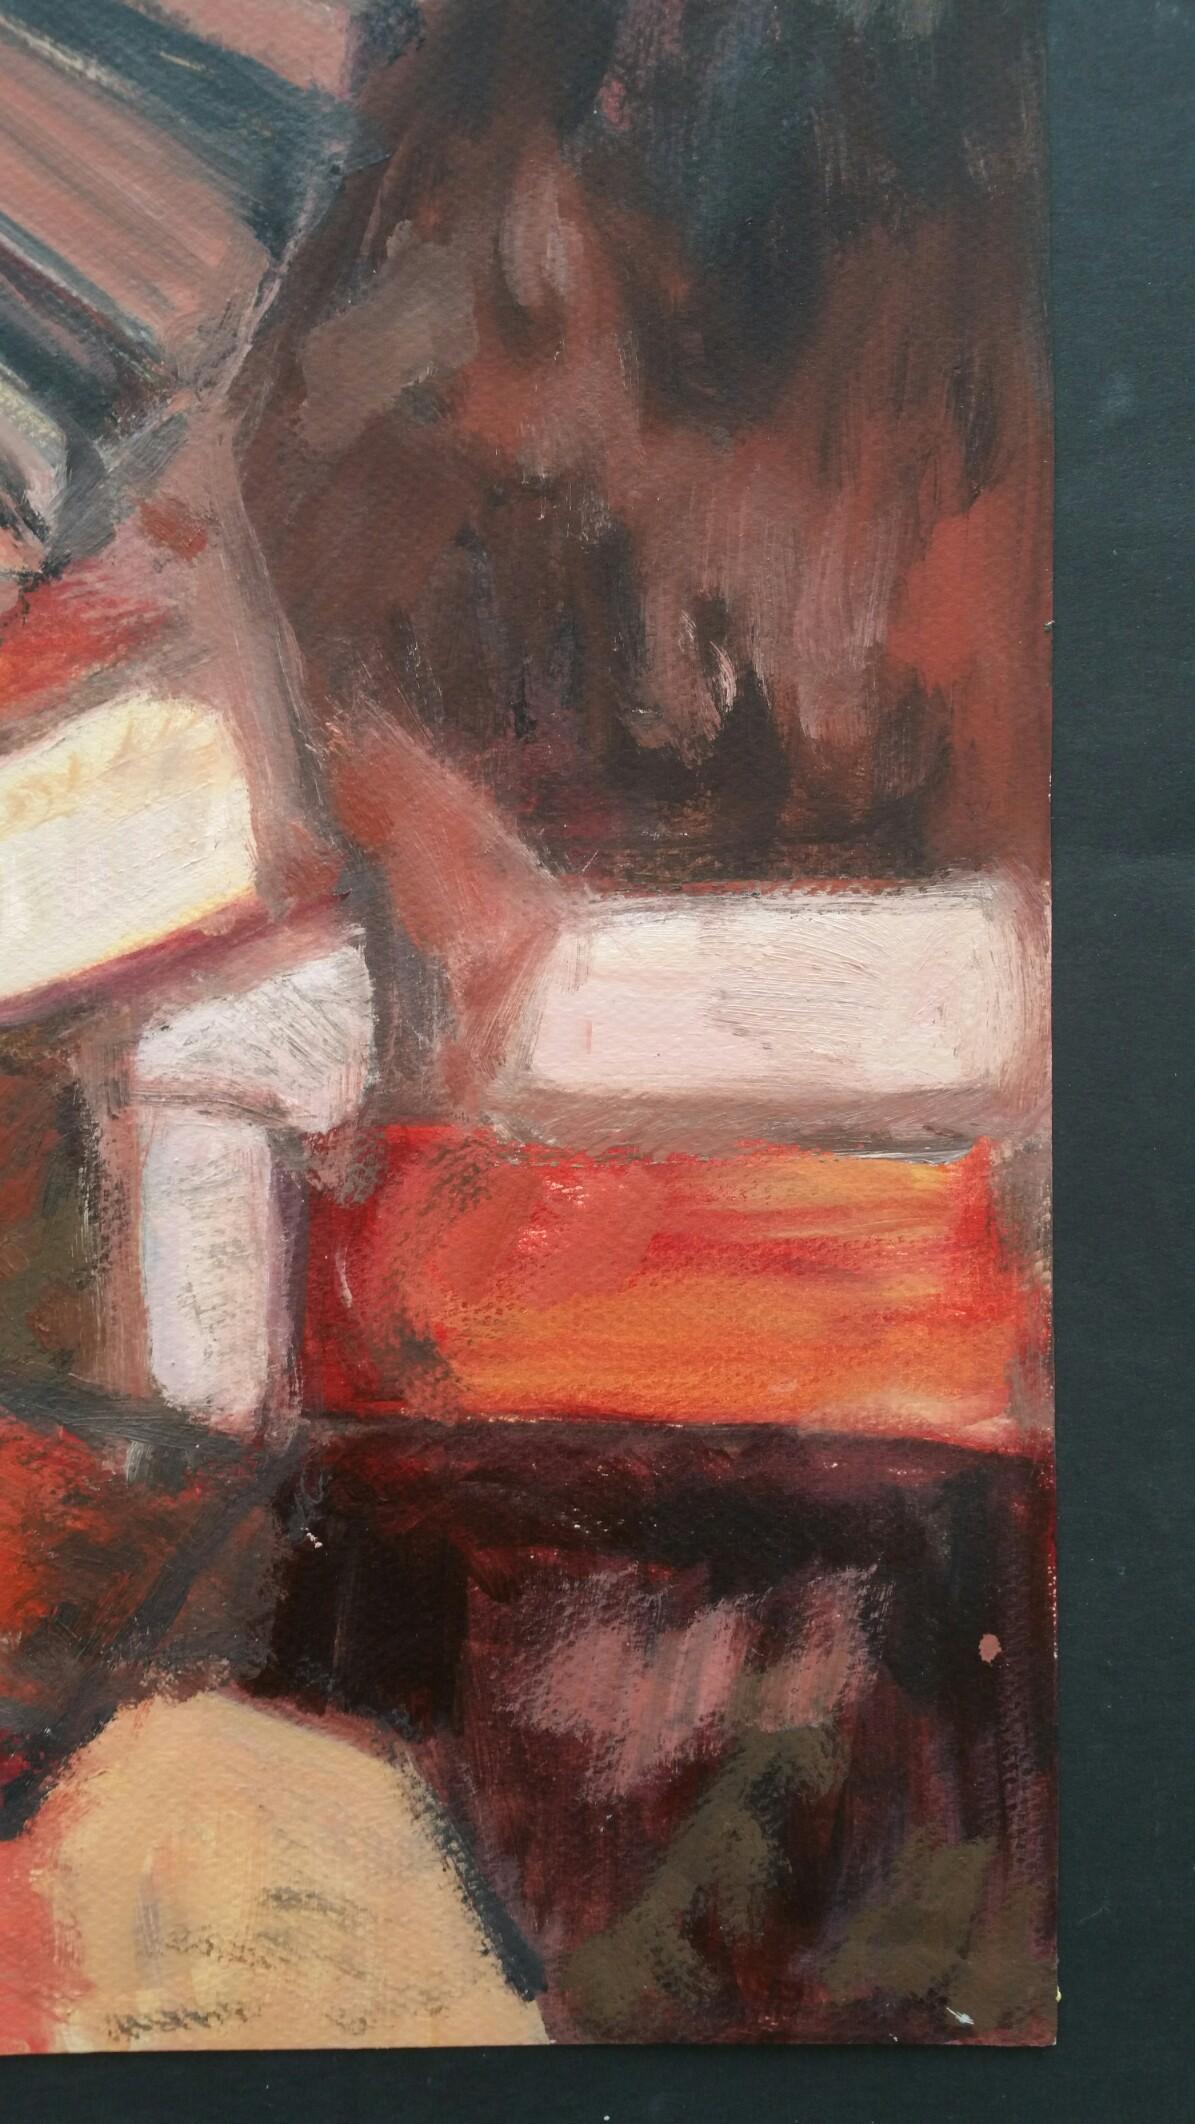 Parisian Abstract Expressionist Original Oil Painting - Reds Browns Pinks For Sale 2